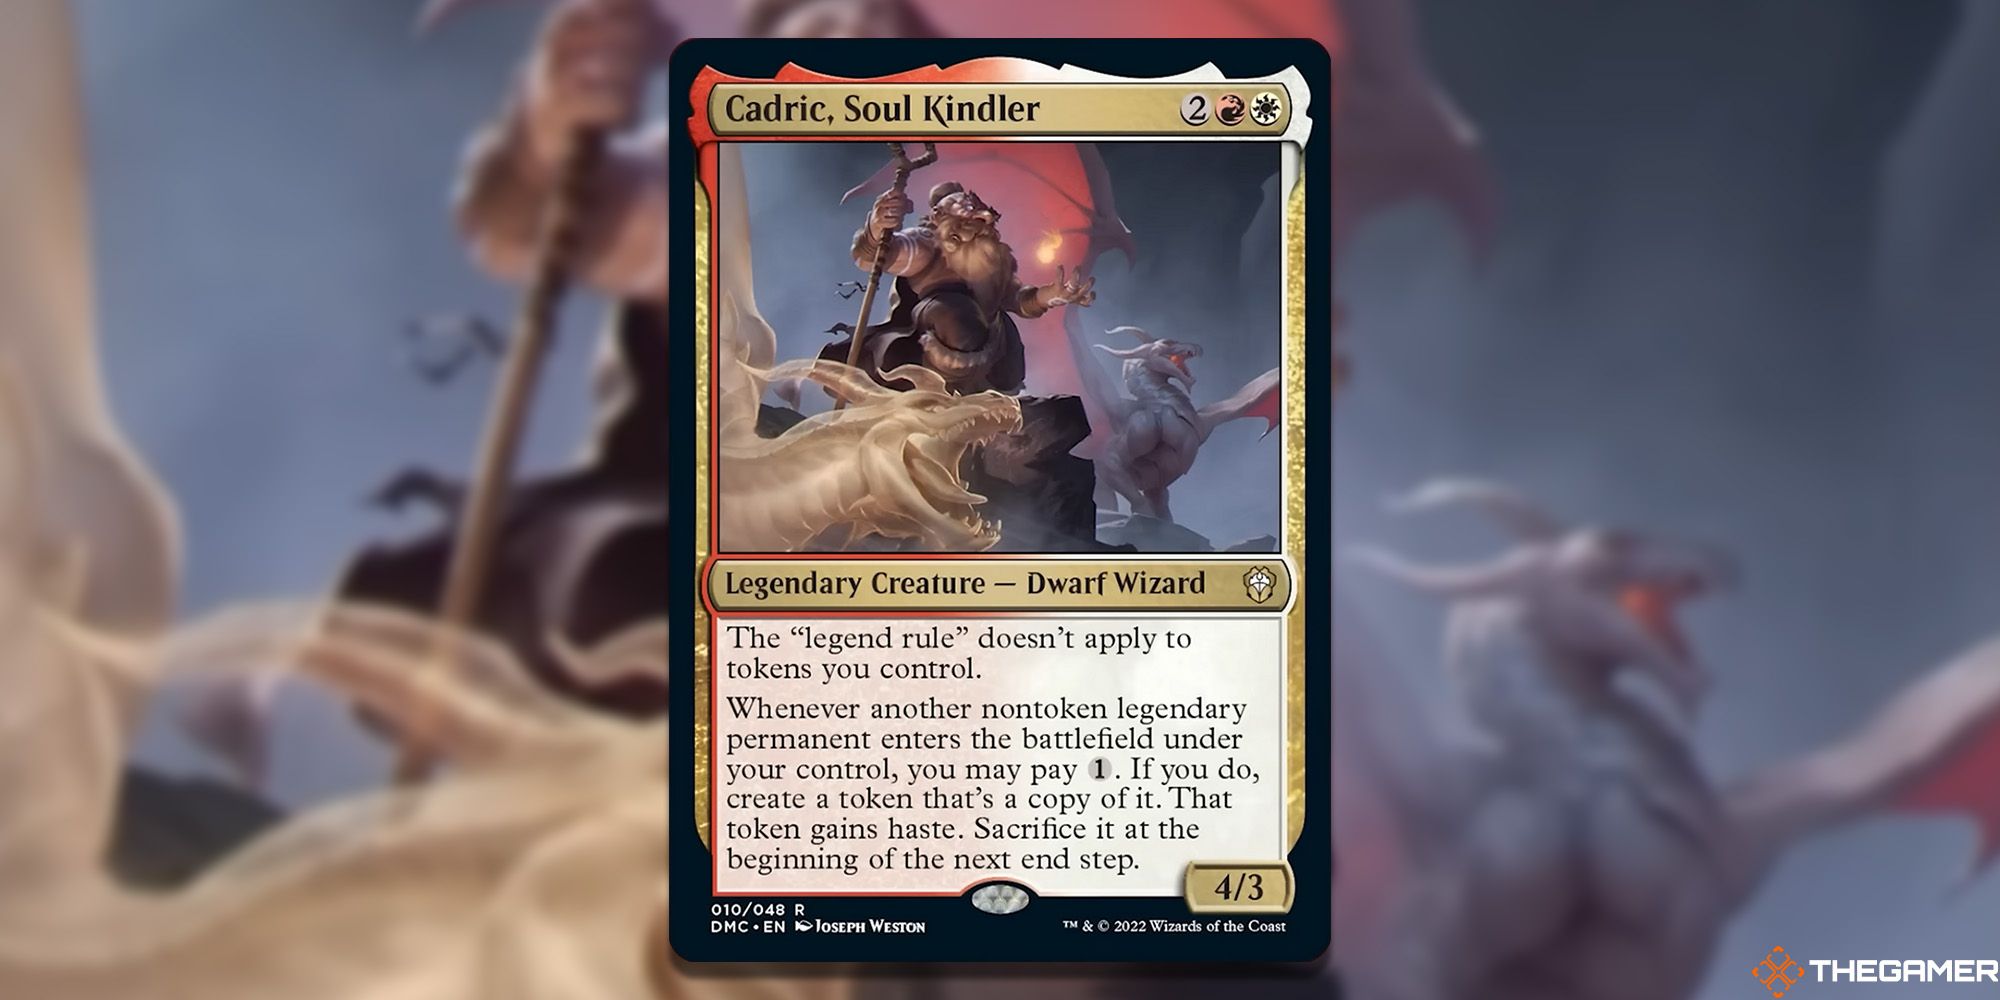 Image of the Cadric, Soul Kindler card in Magic: The Gathering, with art by Joseph Weston